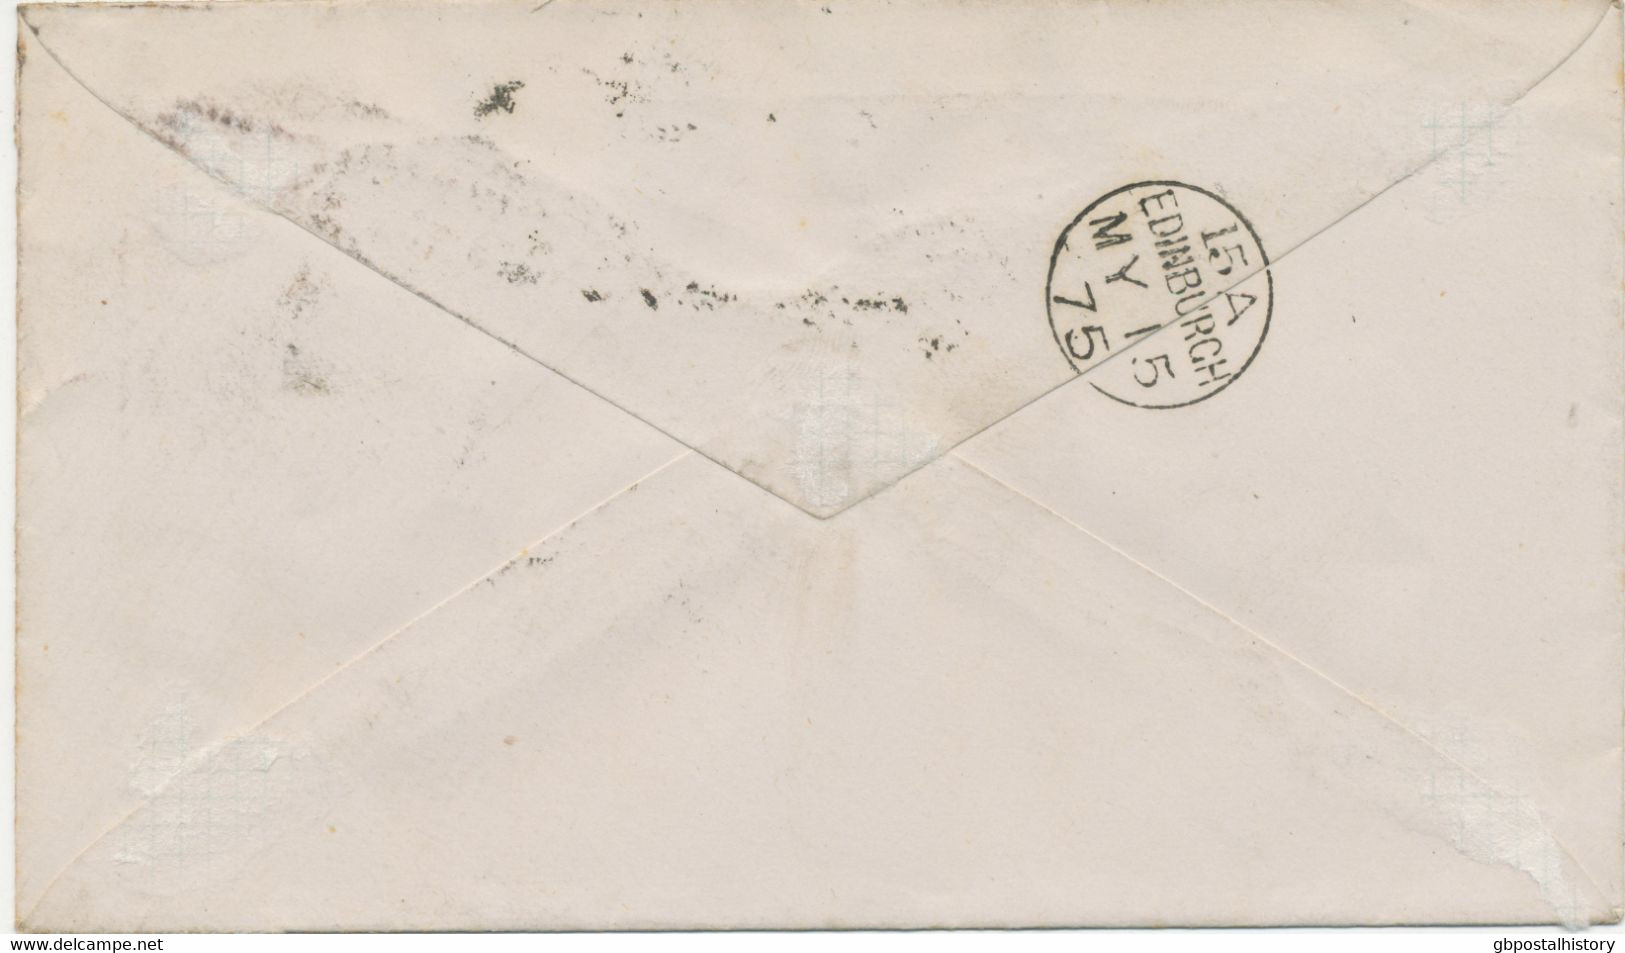 GB „159 / GLASGOW“ Scottish Duplex (4 Bars With Same Length, Time Code „2 &“, Datepart 20mm) On Very Fine Cover - Covers & Documents